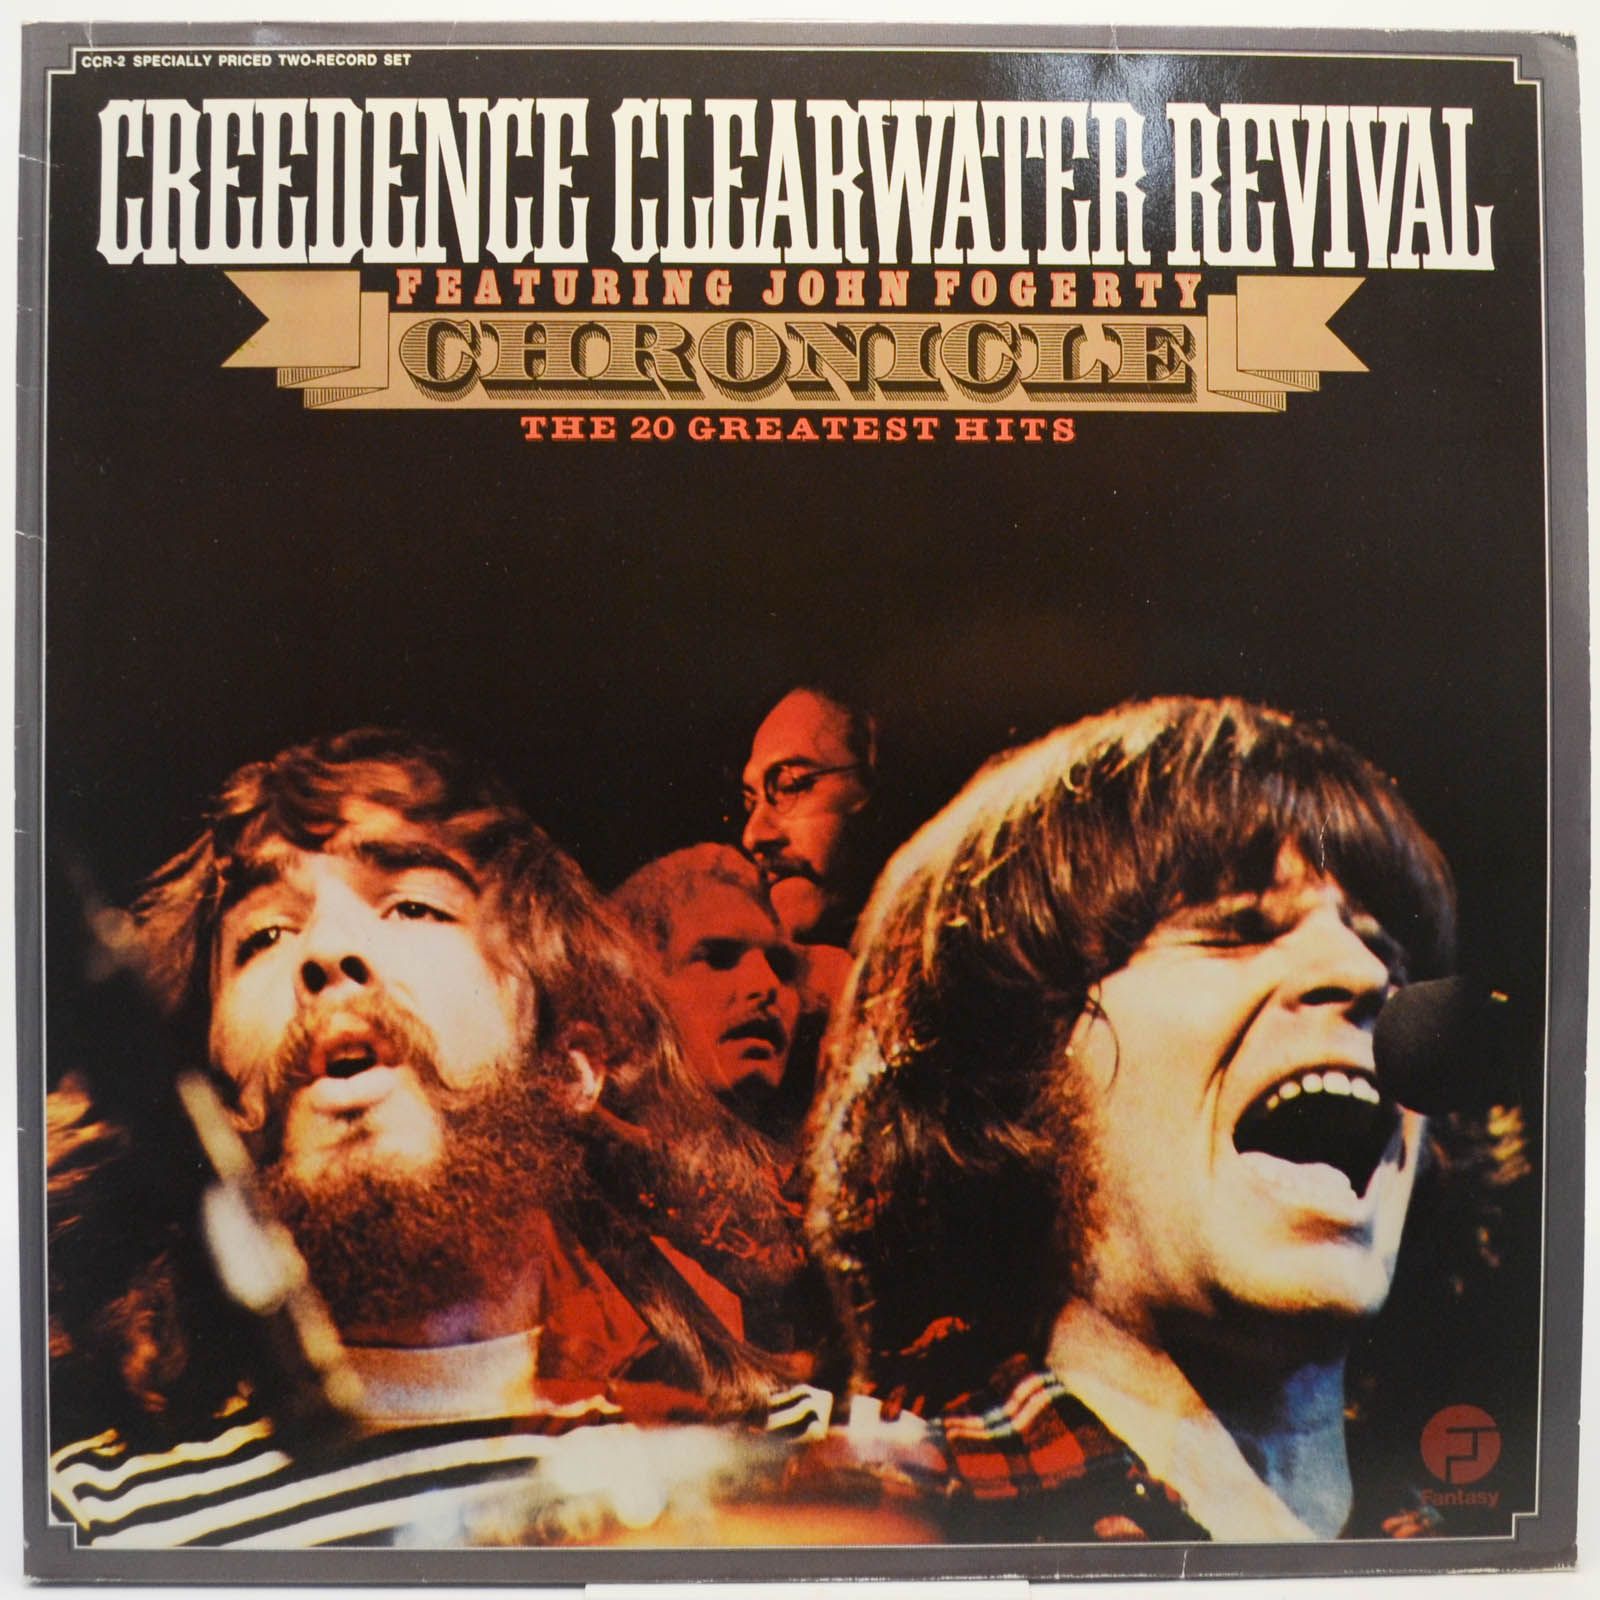 Creedence Clearwater Revival Featuring John Fogerty — Chronicle - The 20 Greatest Hits (2LP), 1976